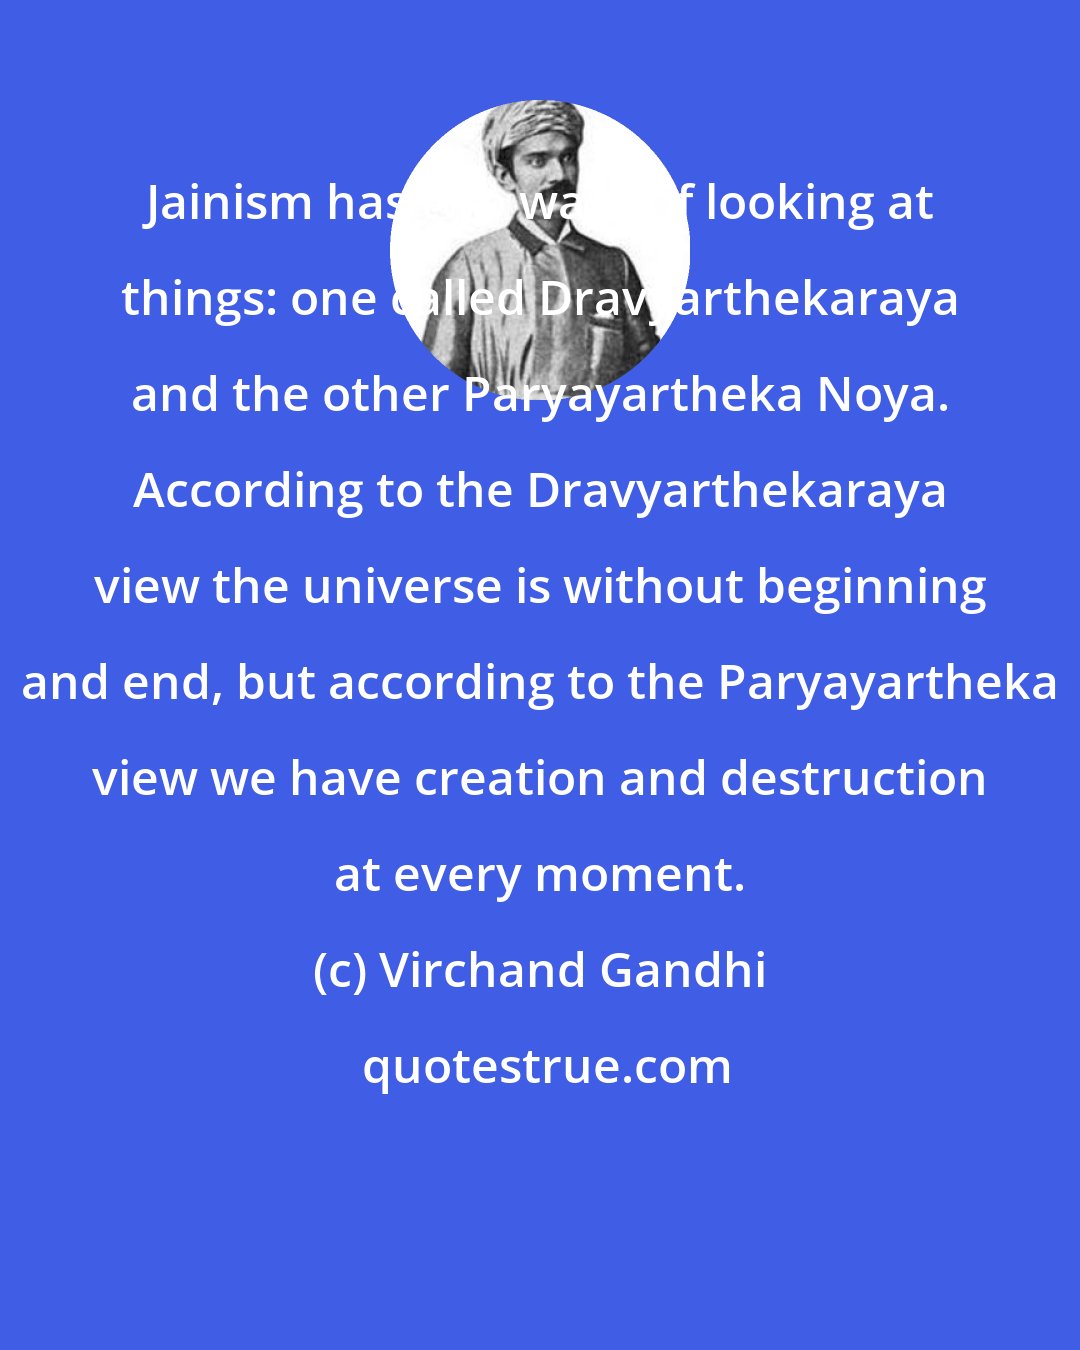 Virchand Gandhi: Jainism has two ways of looking at things: one called Dravyarthekaraya and the other Paryayartheka Noya. According to the Dravyarthekaraya view the universe is without beginning and end, but according to the Paryayartheka view we have creation and destruction at every moment.